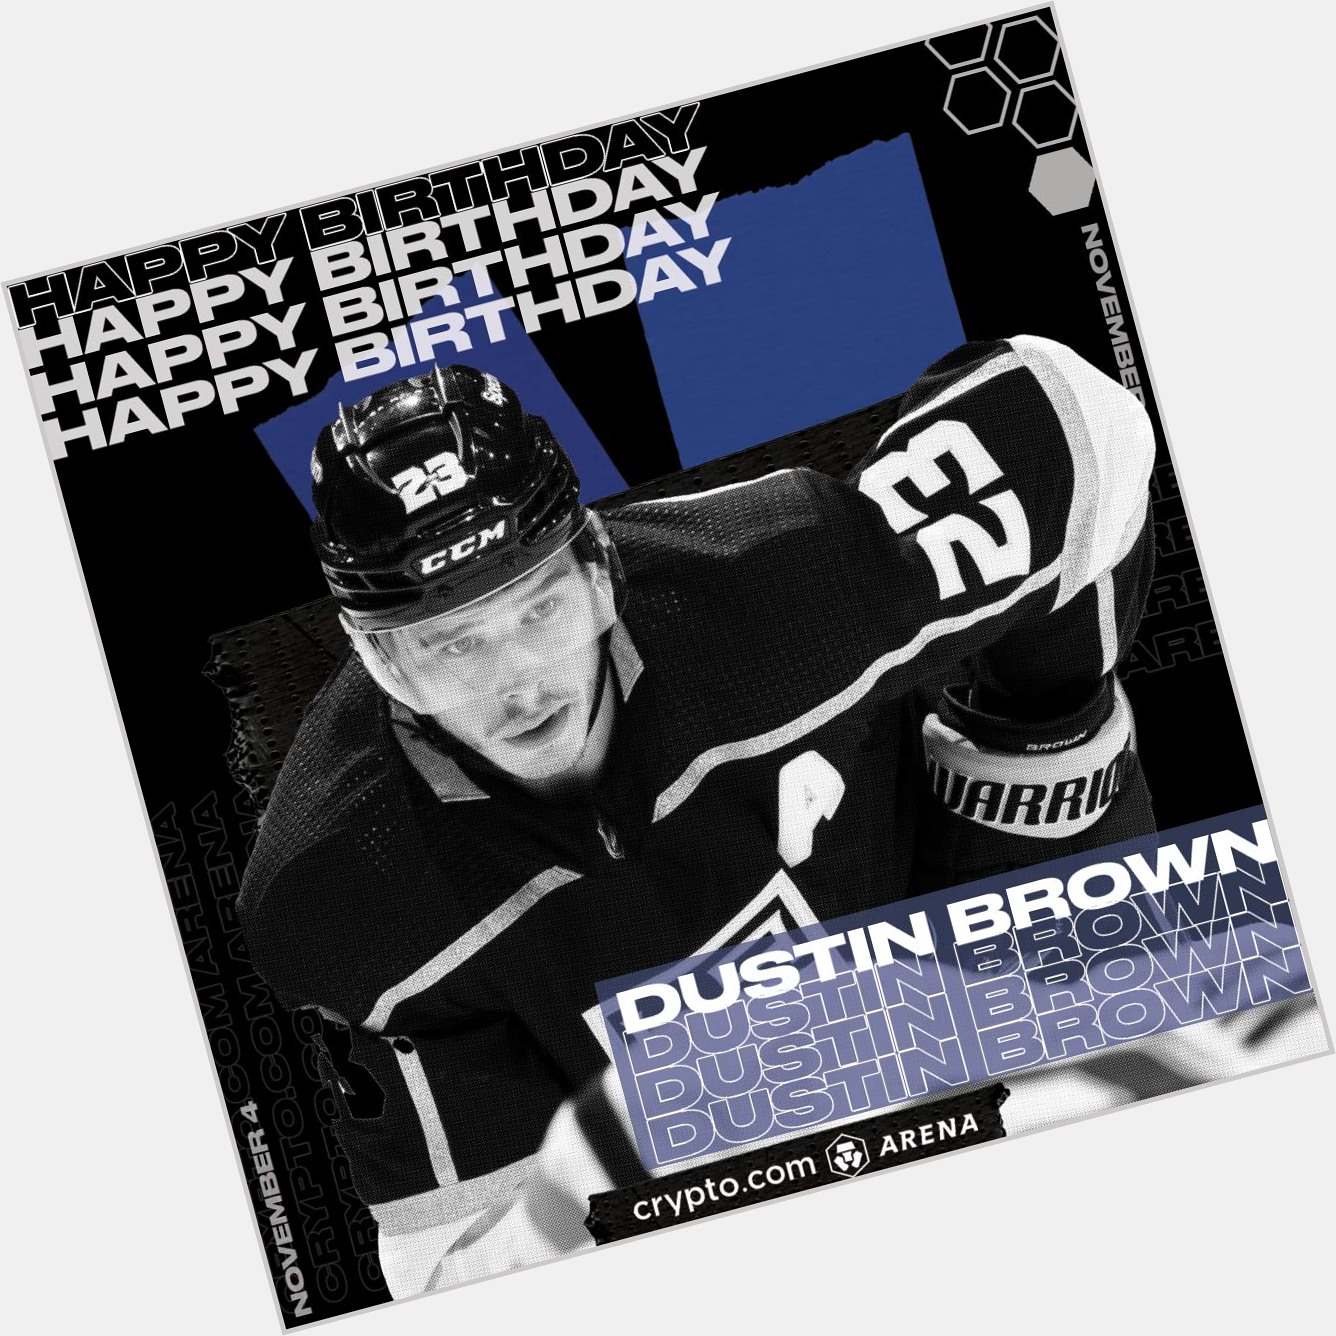 Join us in wishing our guy Dustin Brown of the a very happy birthday!   